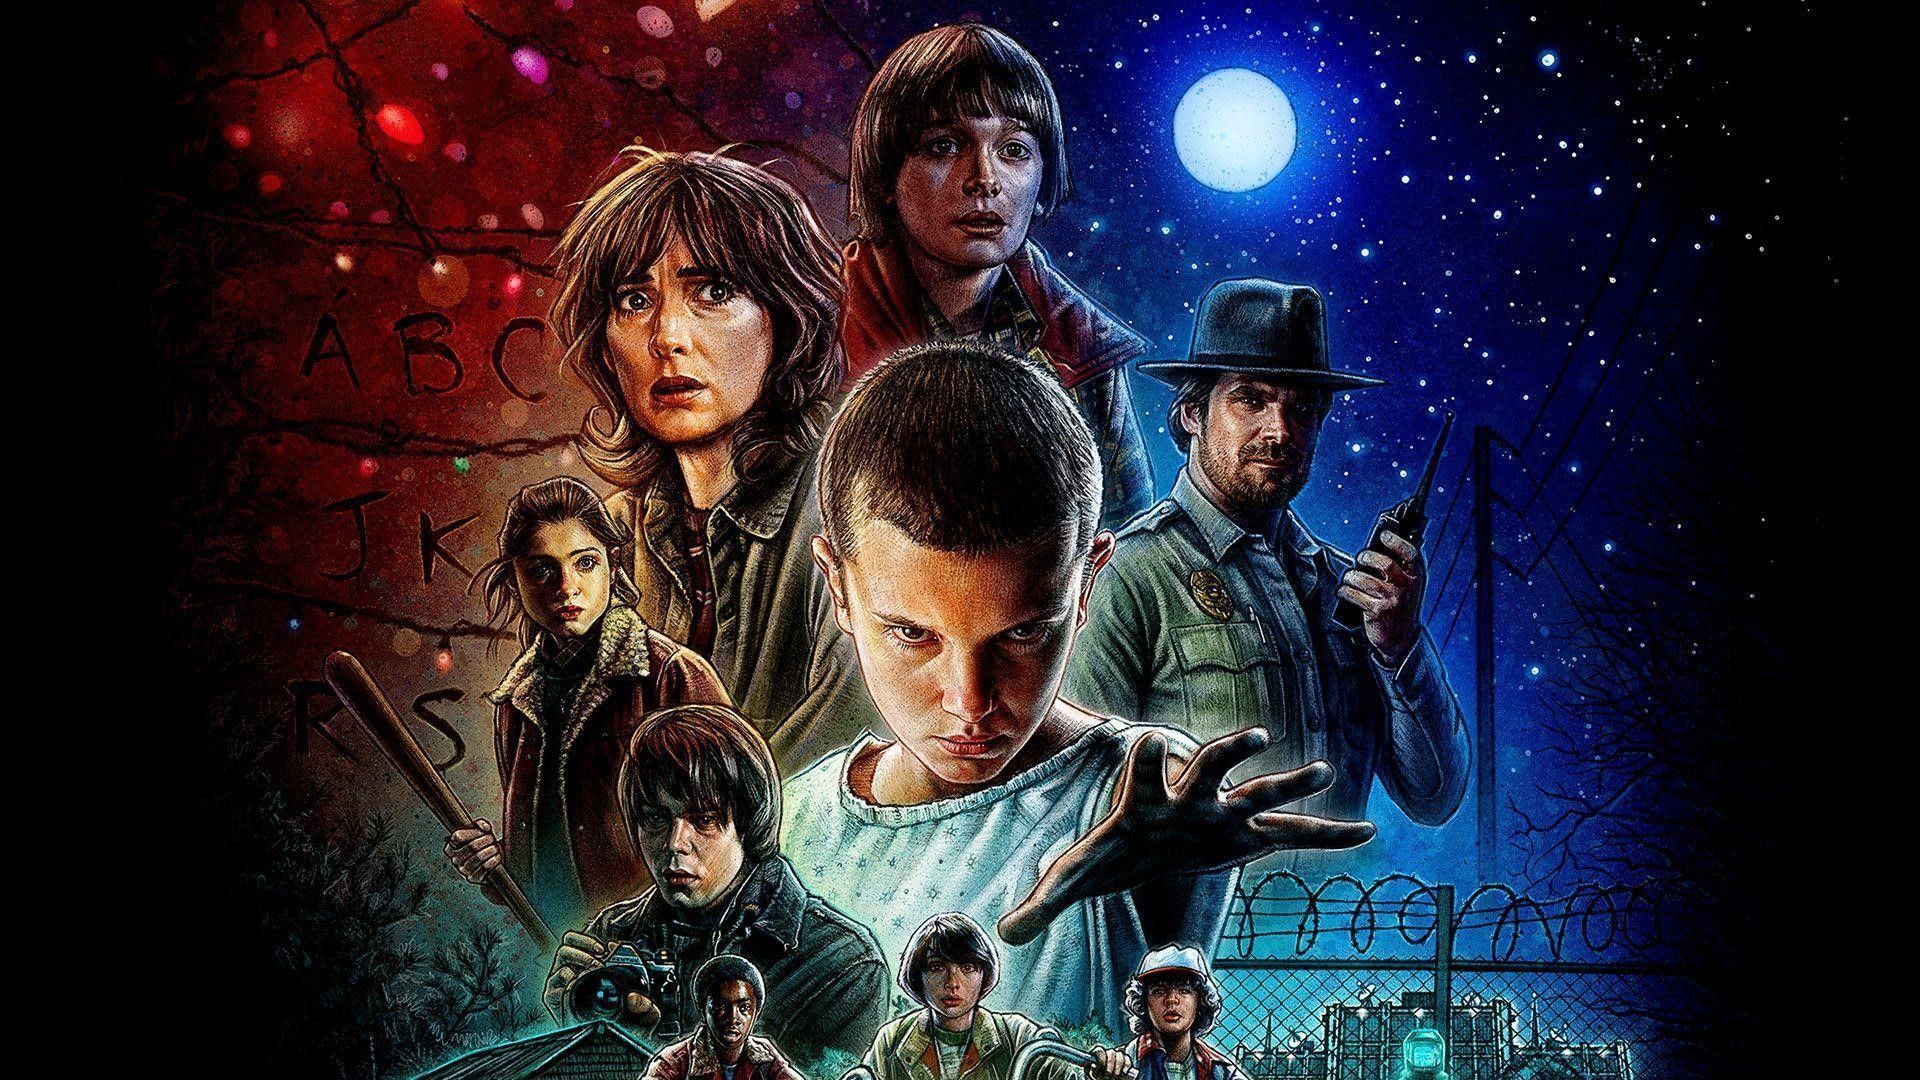 The cast of Stranger Things on a poster for the show - Stranger Things